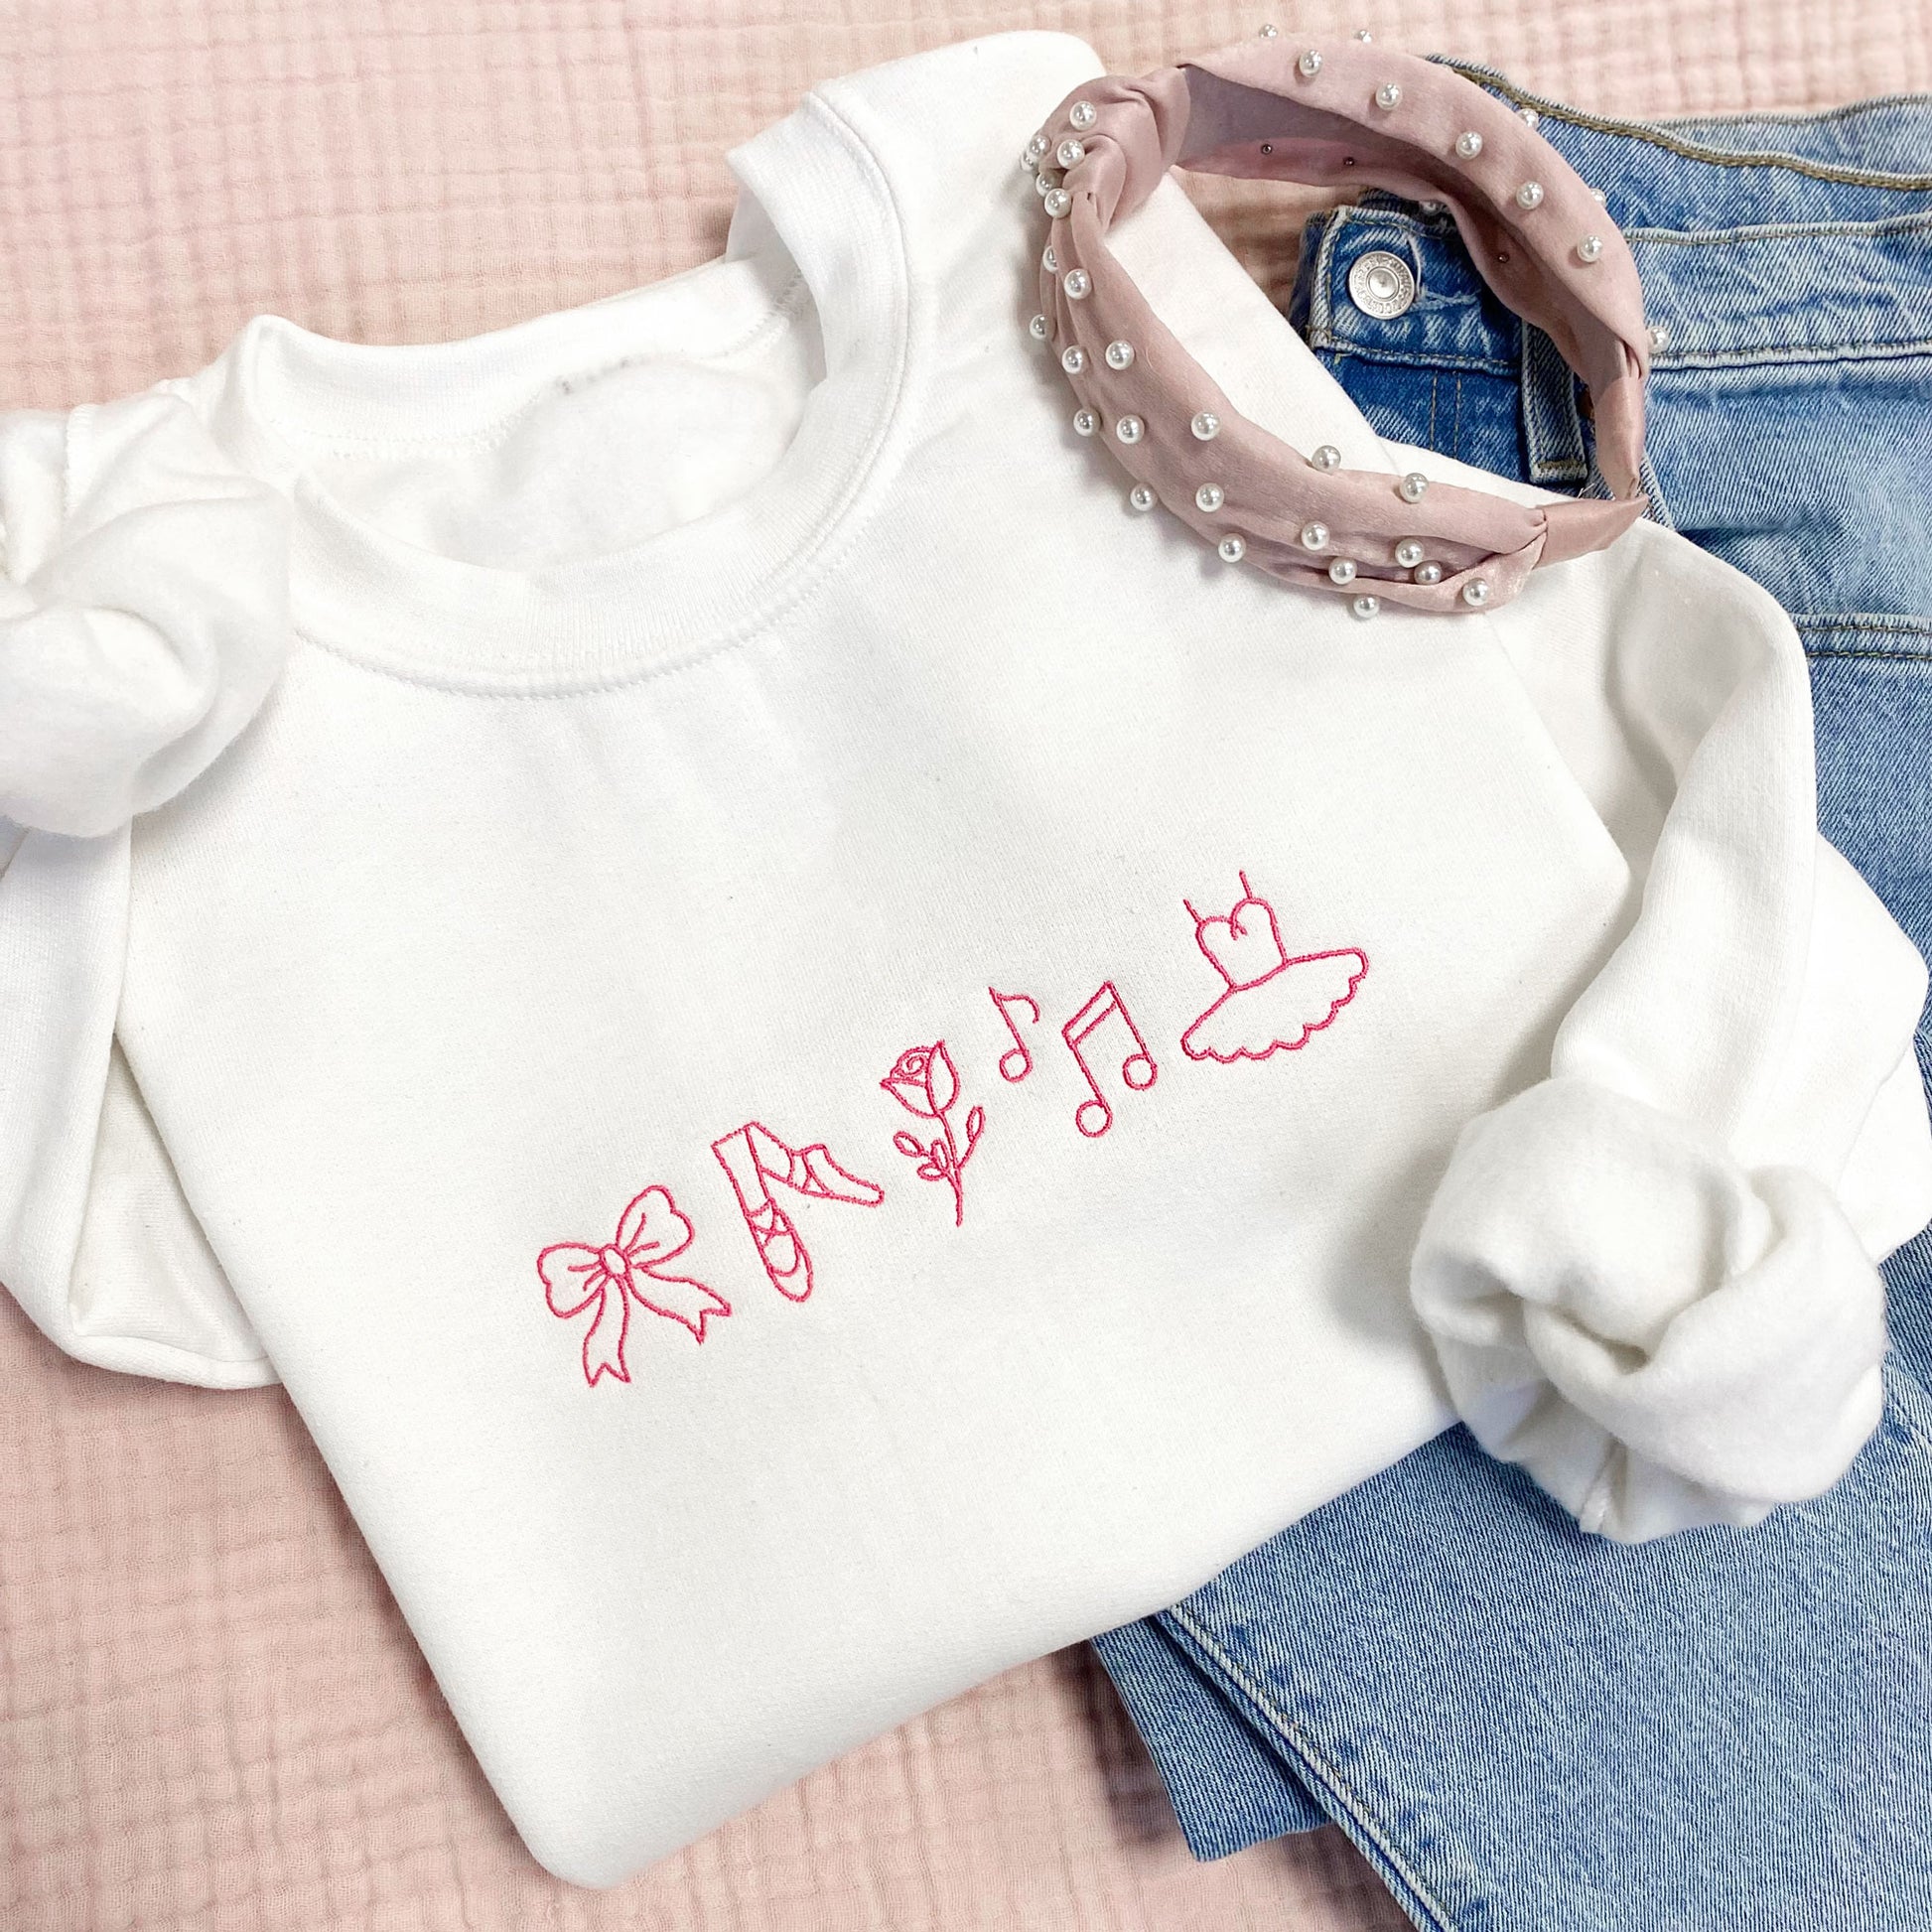 Styled flat lay with a white crewneck sweatshirt with pink embroidered dance icons across the center chest